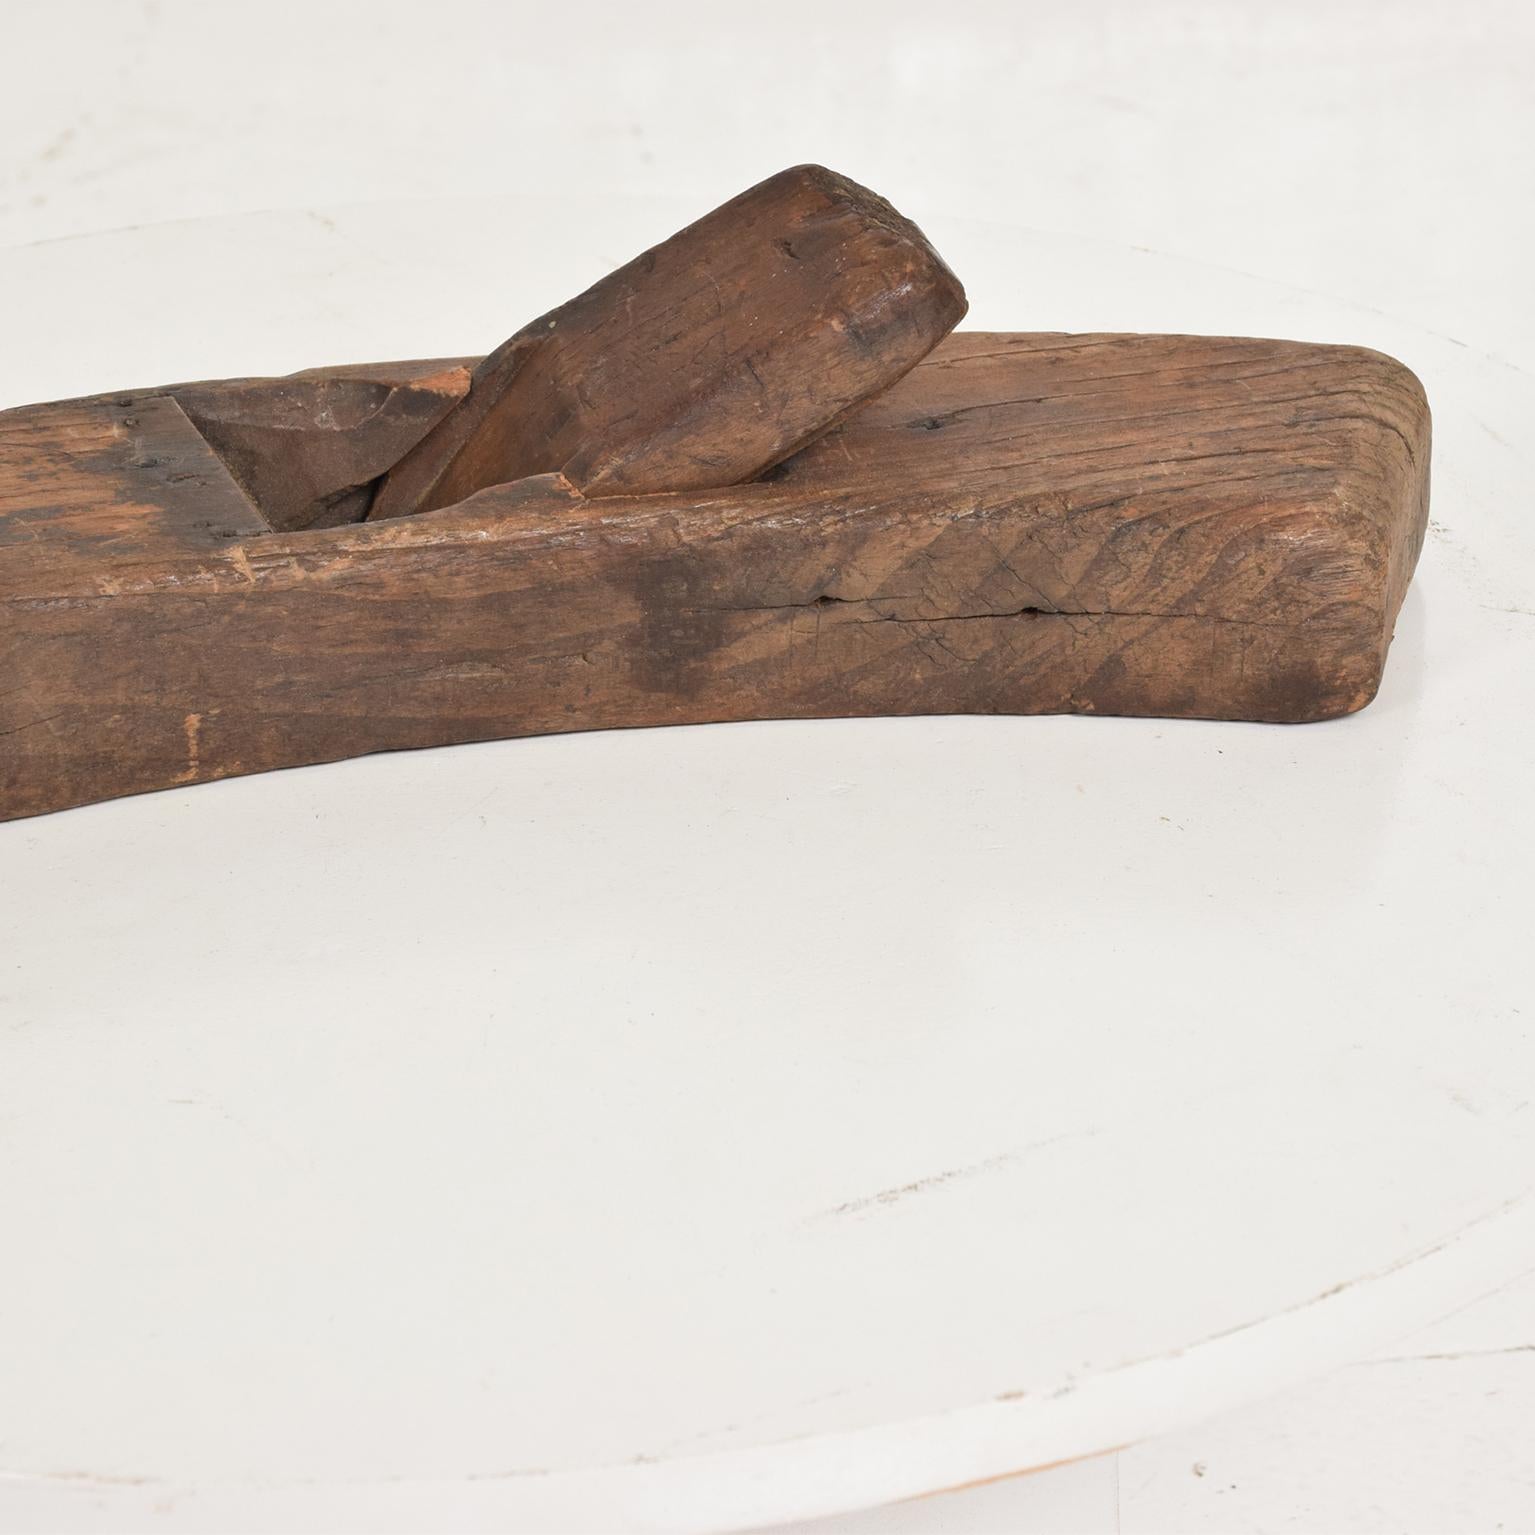 For your consideration, an antique Japanese hand wood planner curved carpenter tool.
Beautiful decorative collector item.
Original vintage unrestored condition. 

Dimensions: 13 1/2